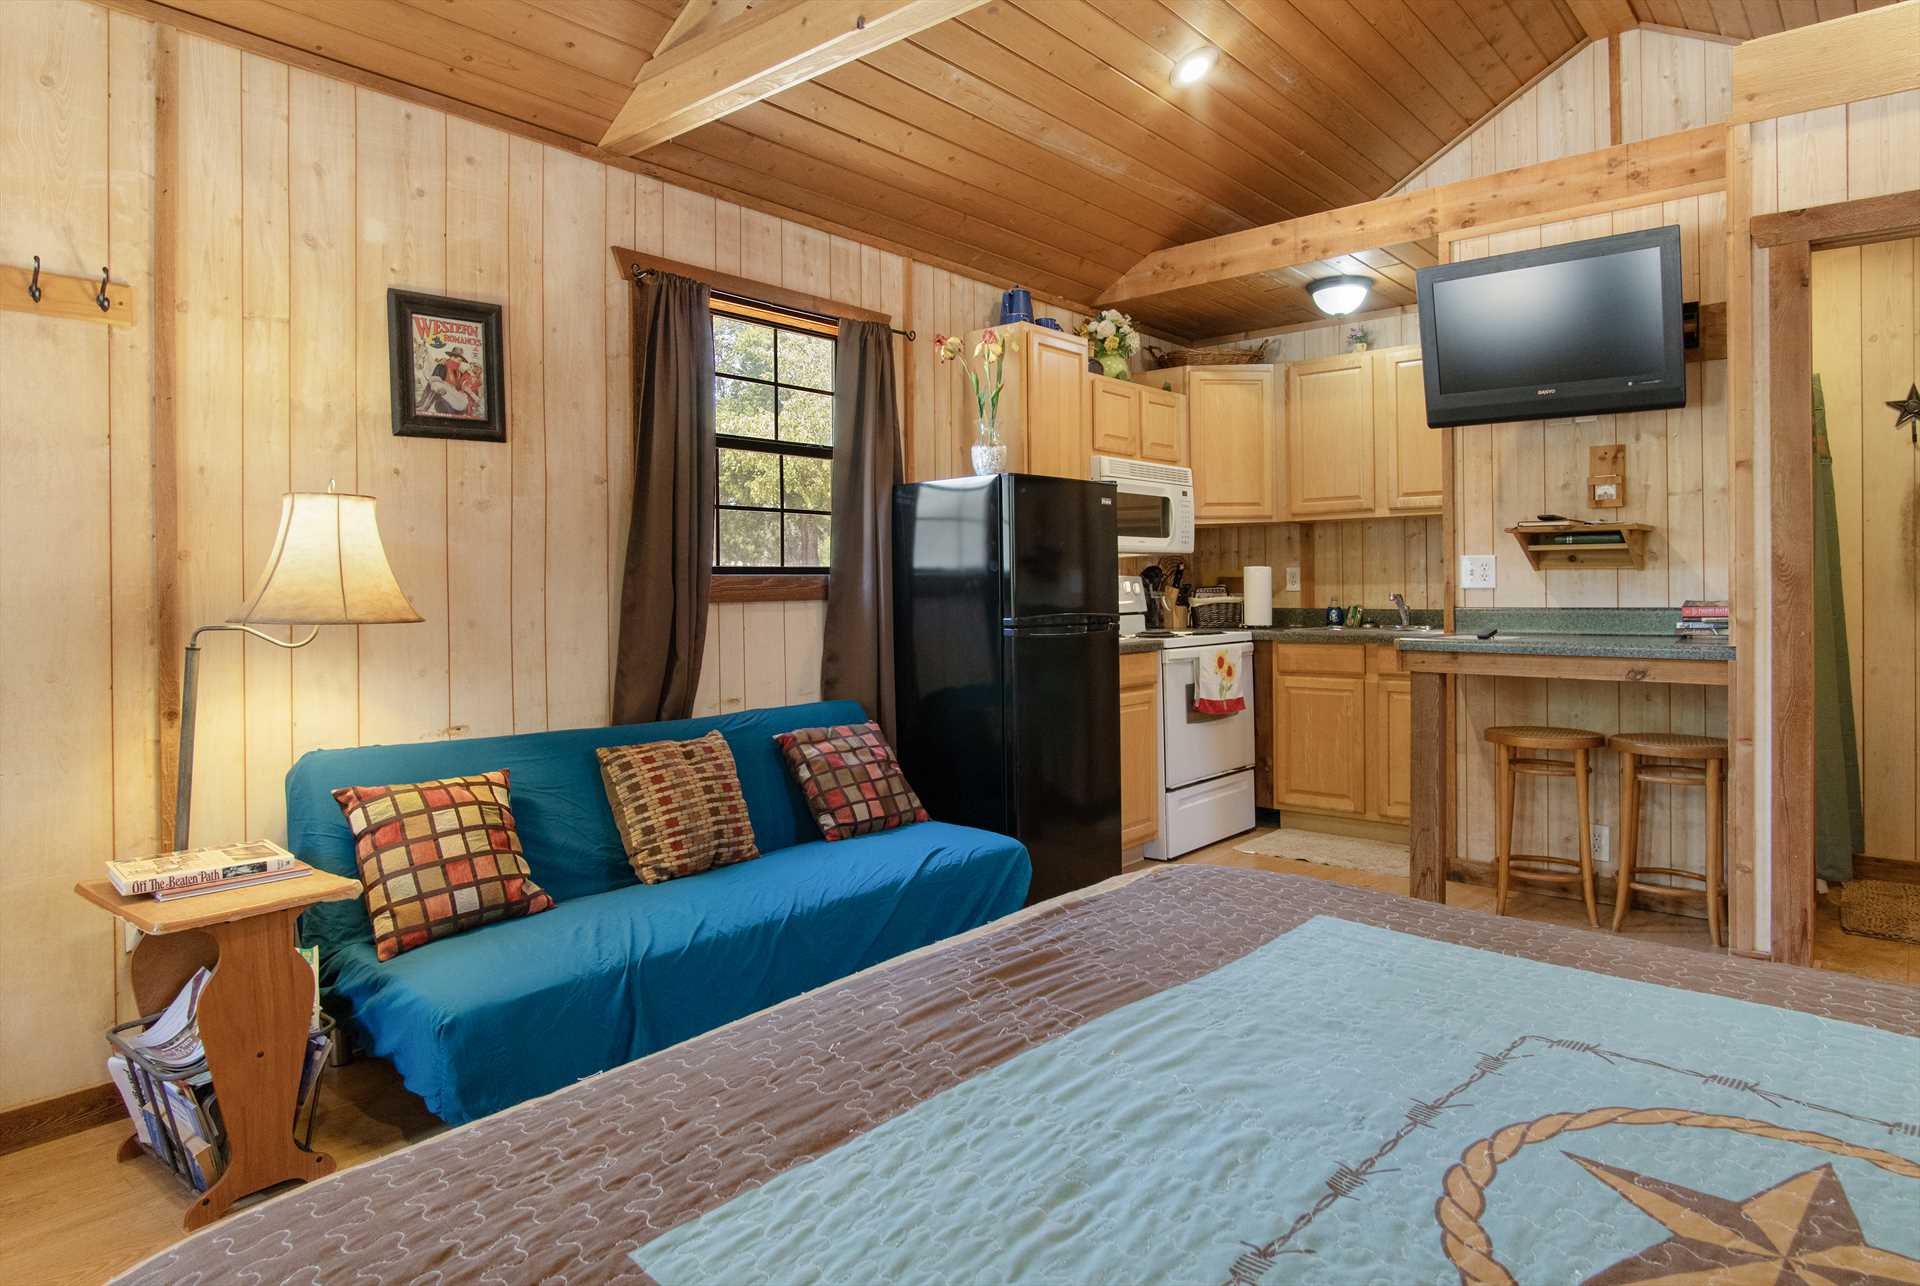                                                 Stretch out in comfort with AC and heat, satellite TV, and Wifi service throughout the cabin!